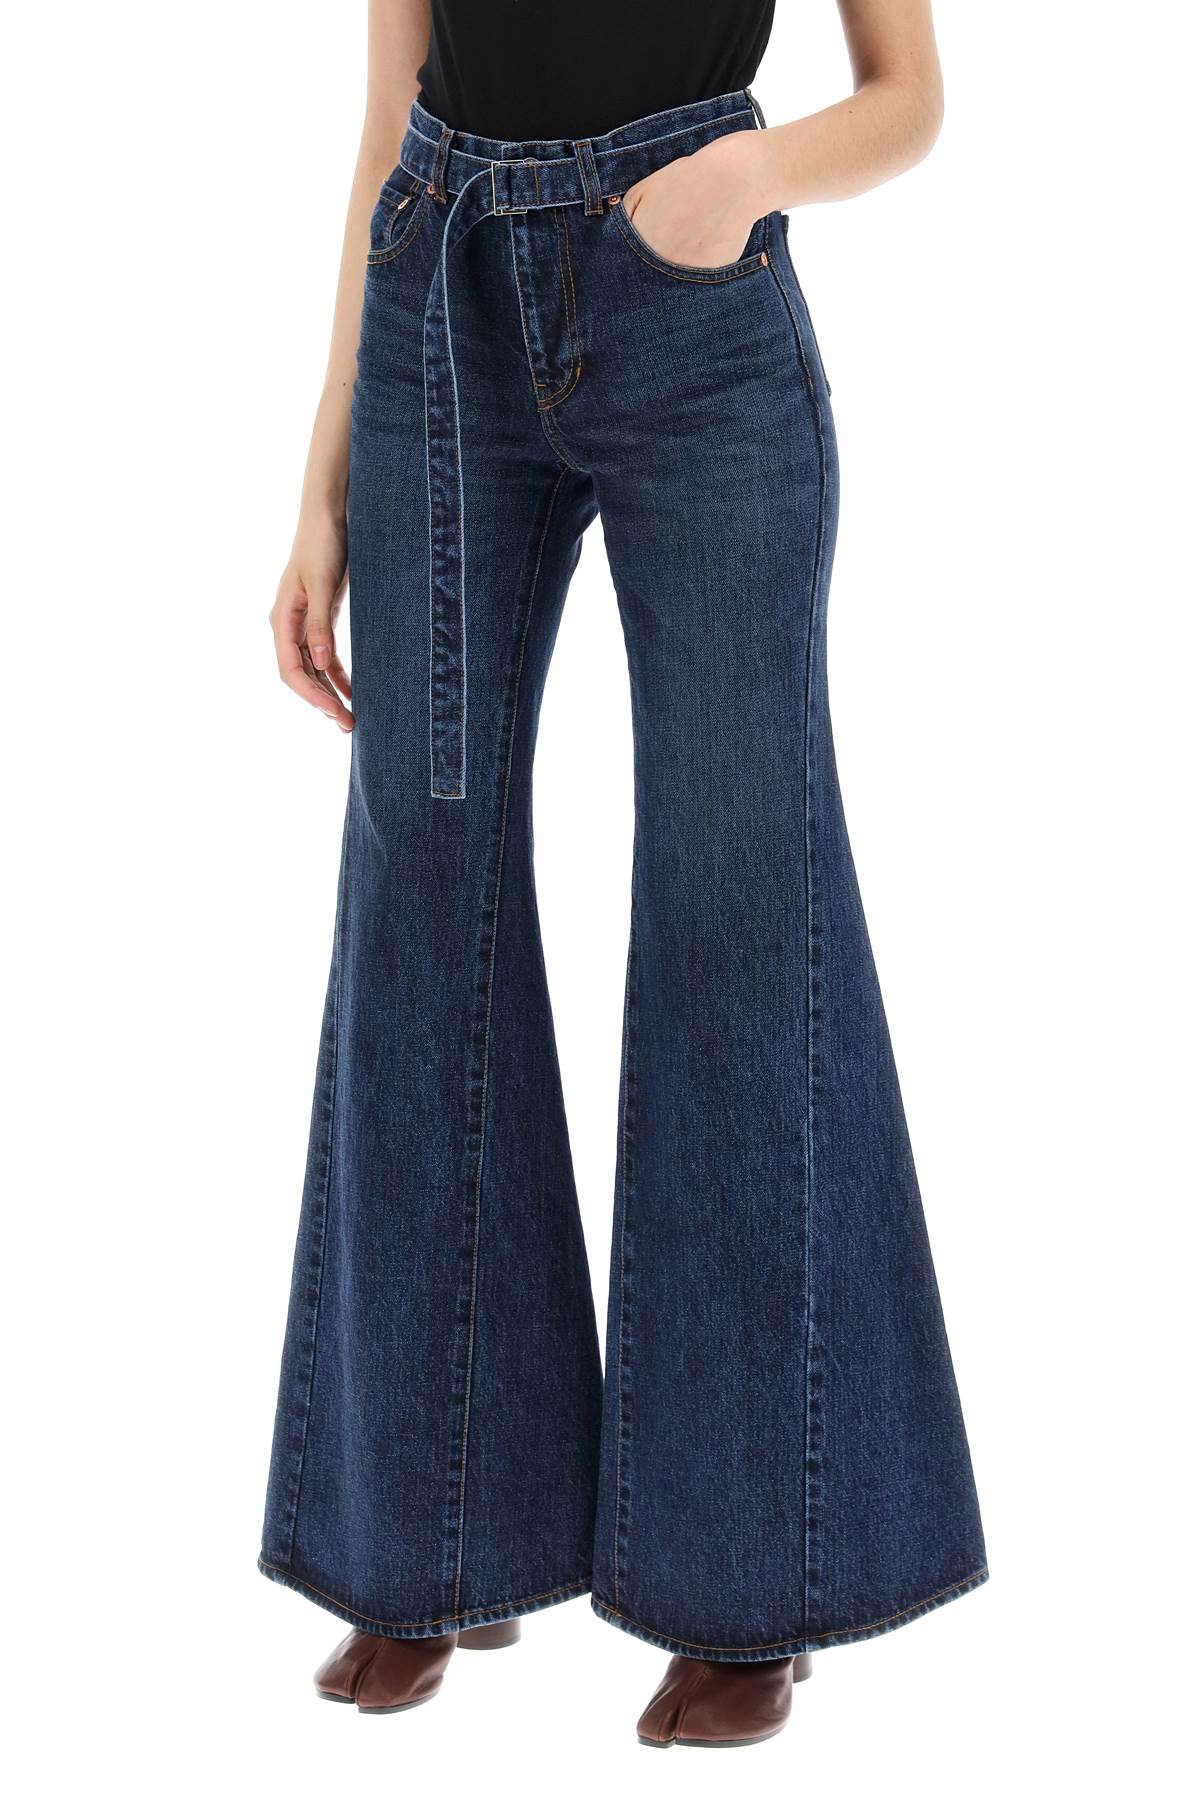 boot cut jeans with matching belt-3